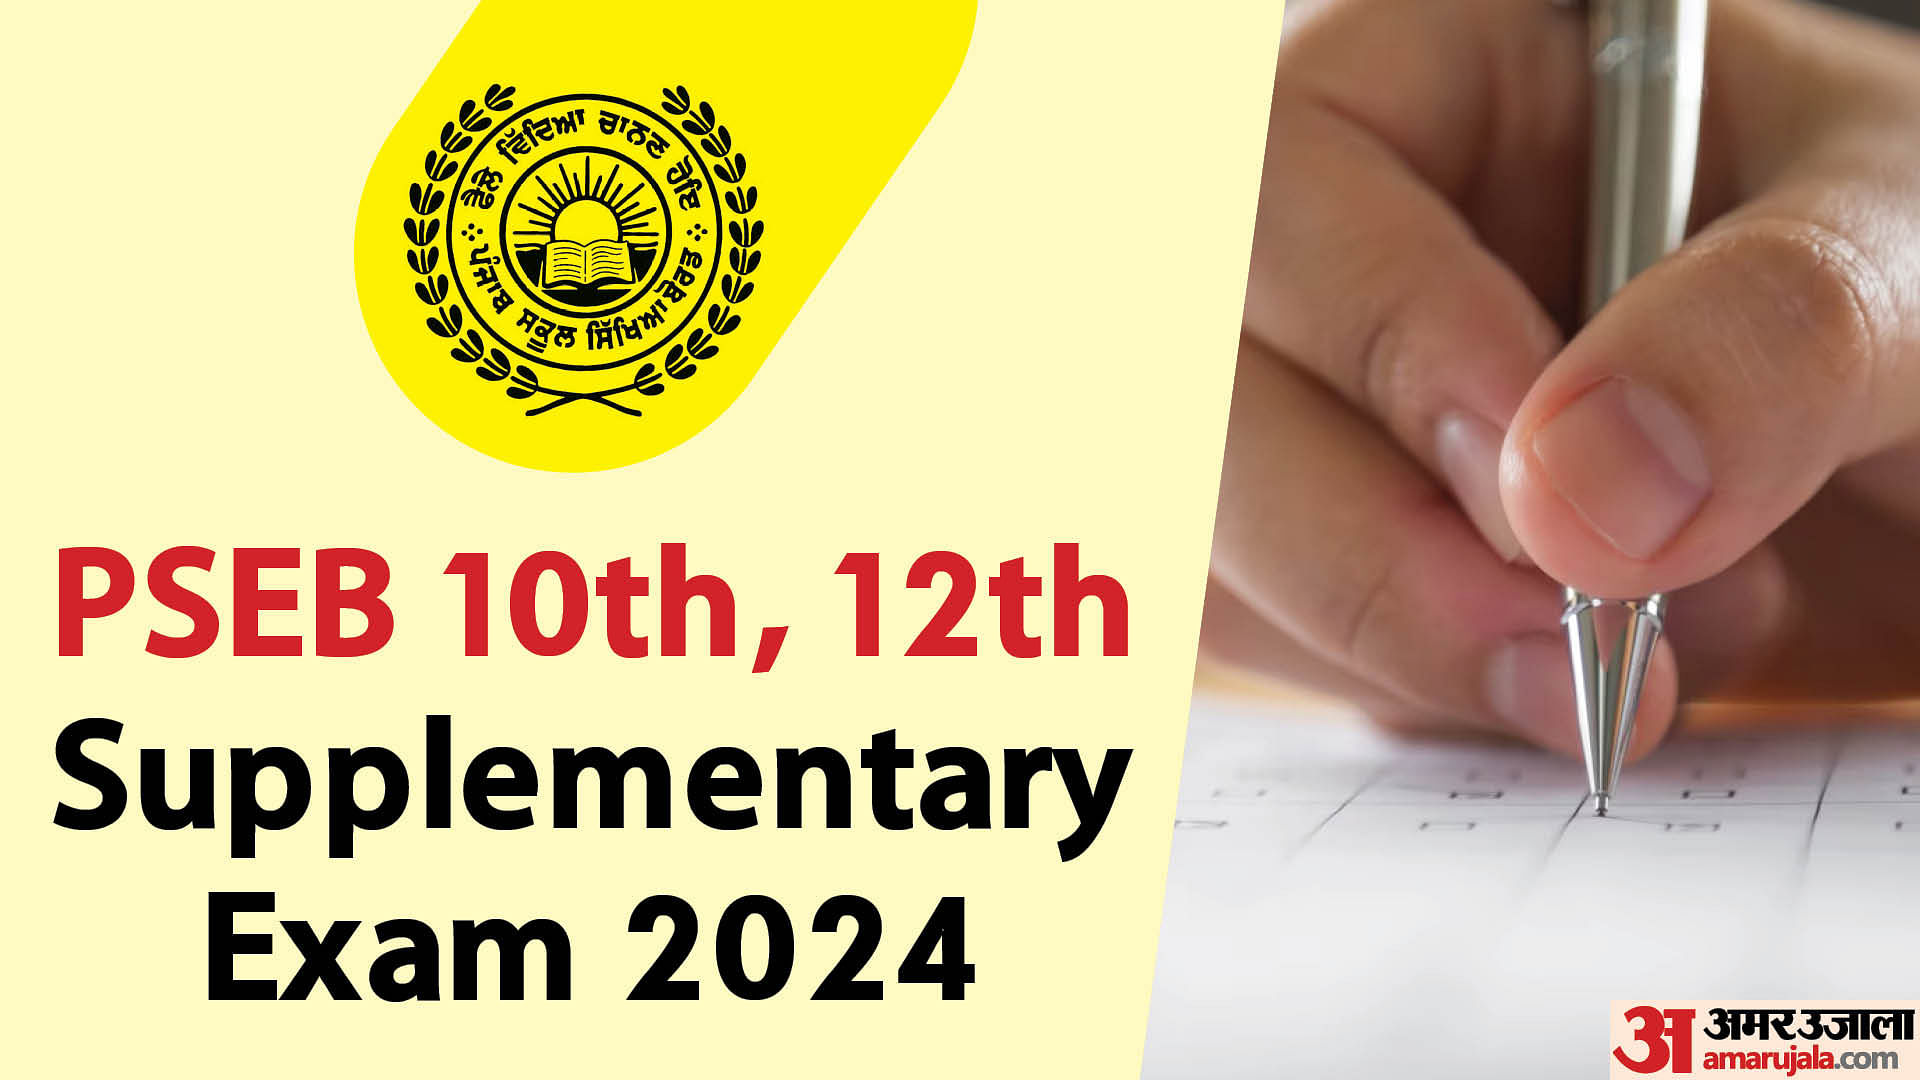 PSEB 10th, 12th Supplementary Exam 2024 registration window open now, Submit your application at pseb.ac.in